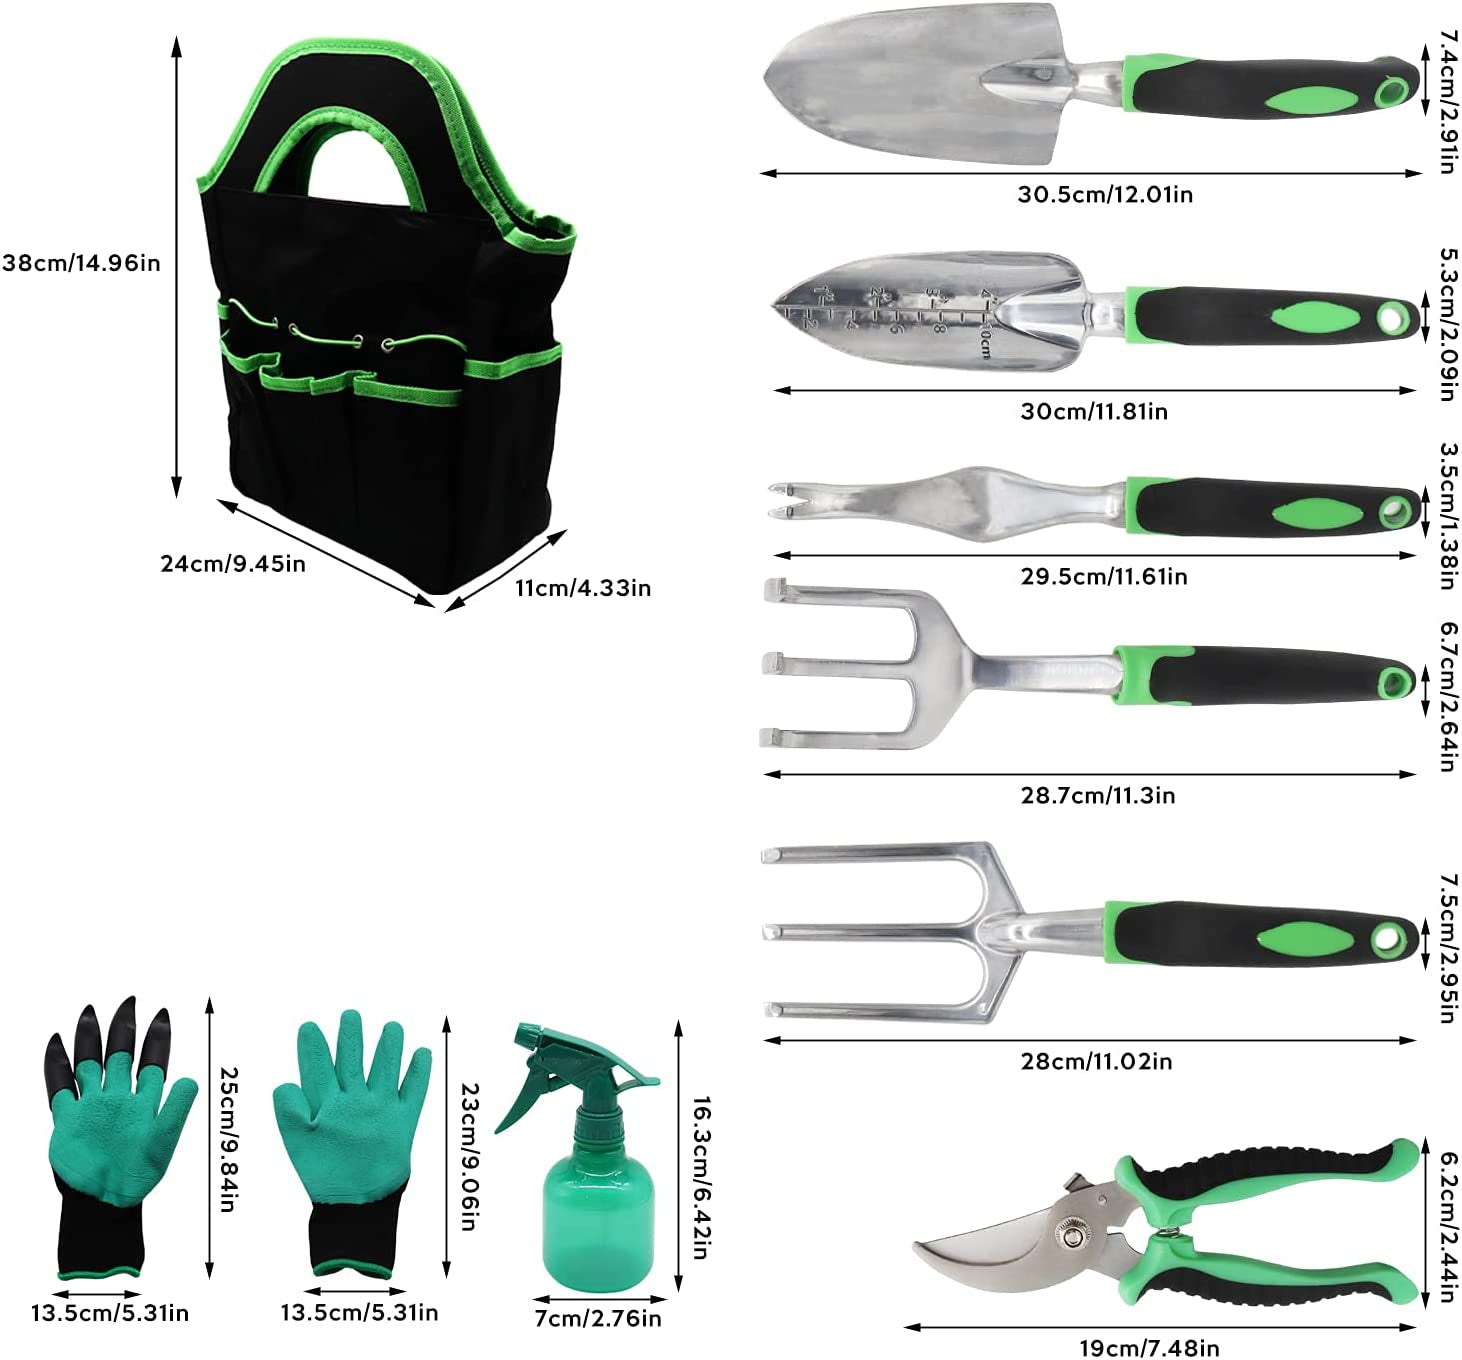 valuehall, Garden Tools Set Valuehall 9Pcs Extra Succulent Tools Set Heavy Duty Gardening Tools Set with Stainless Steel Shovel Rake Fork Shear Gloves and Storage Tote Bag for Men Women Gardeners V7H03